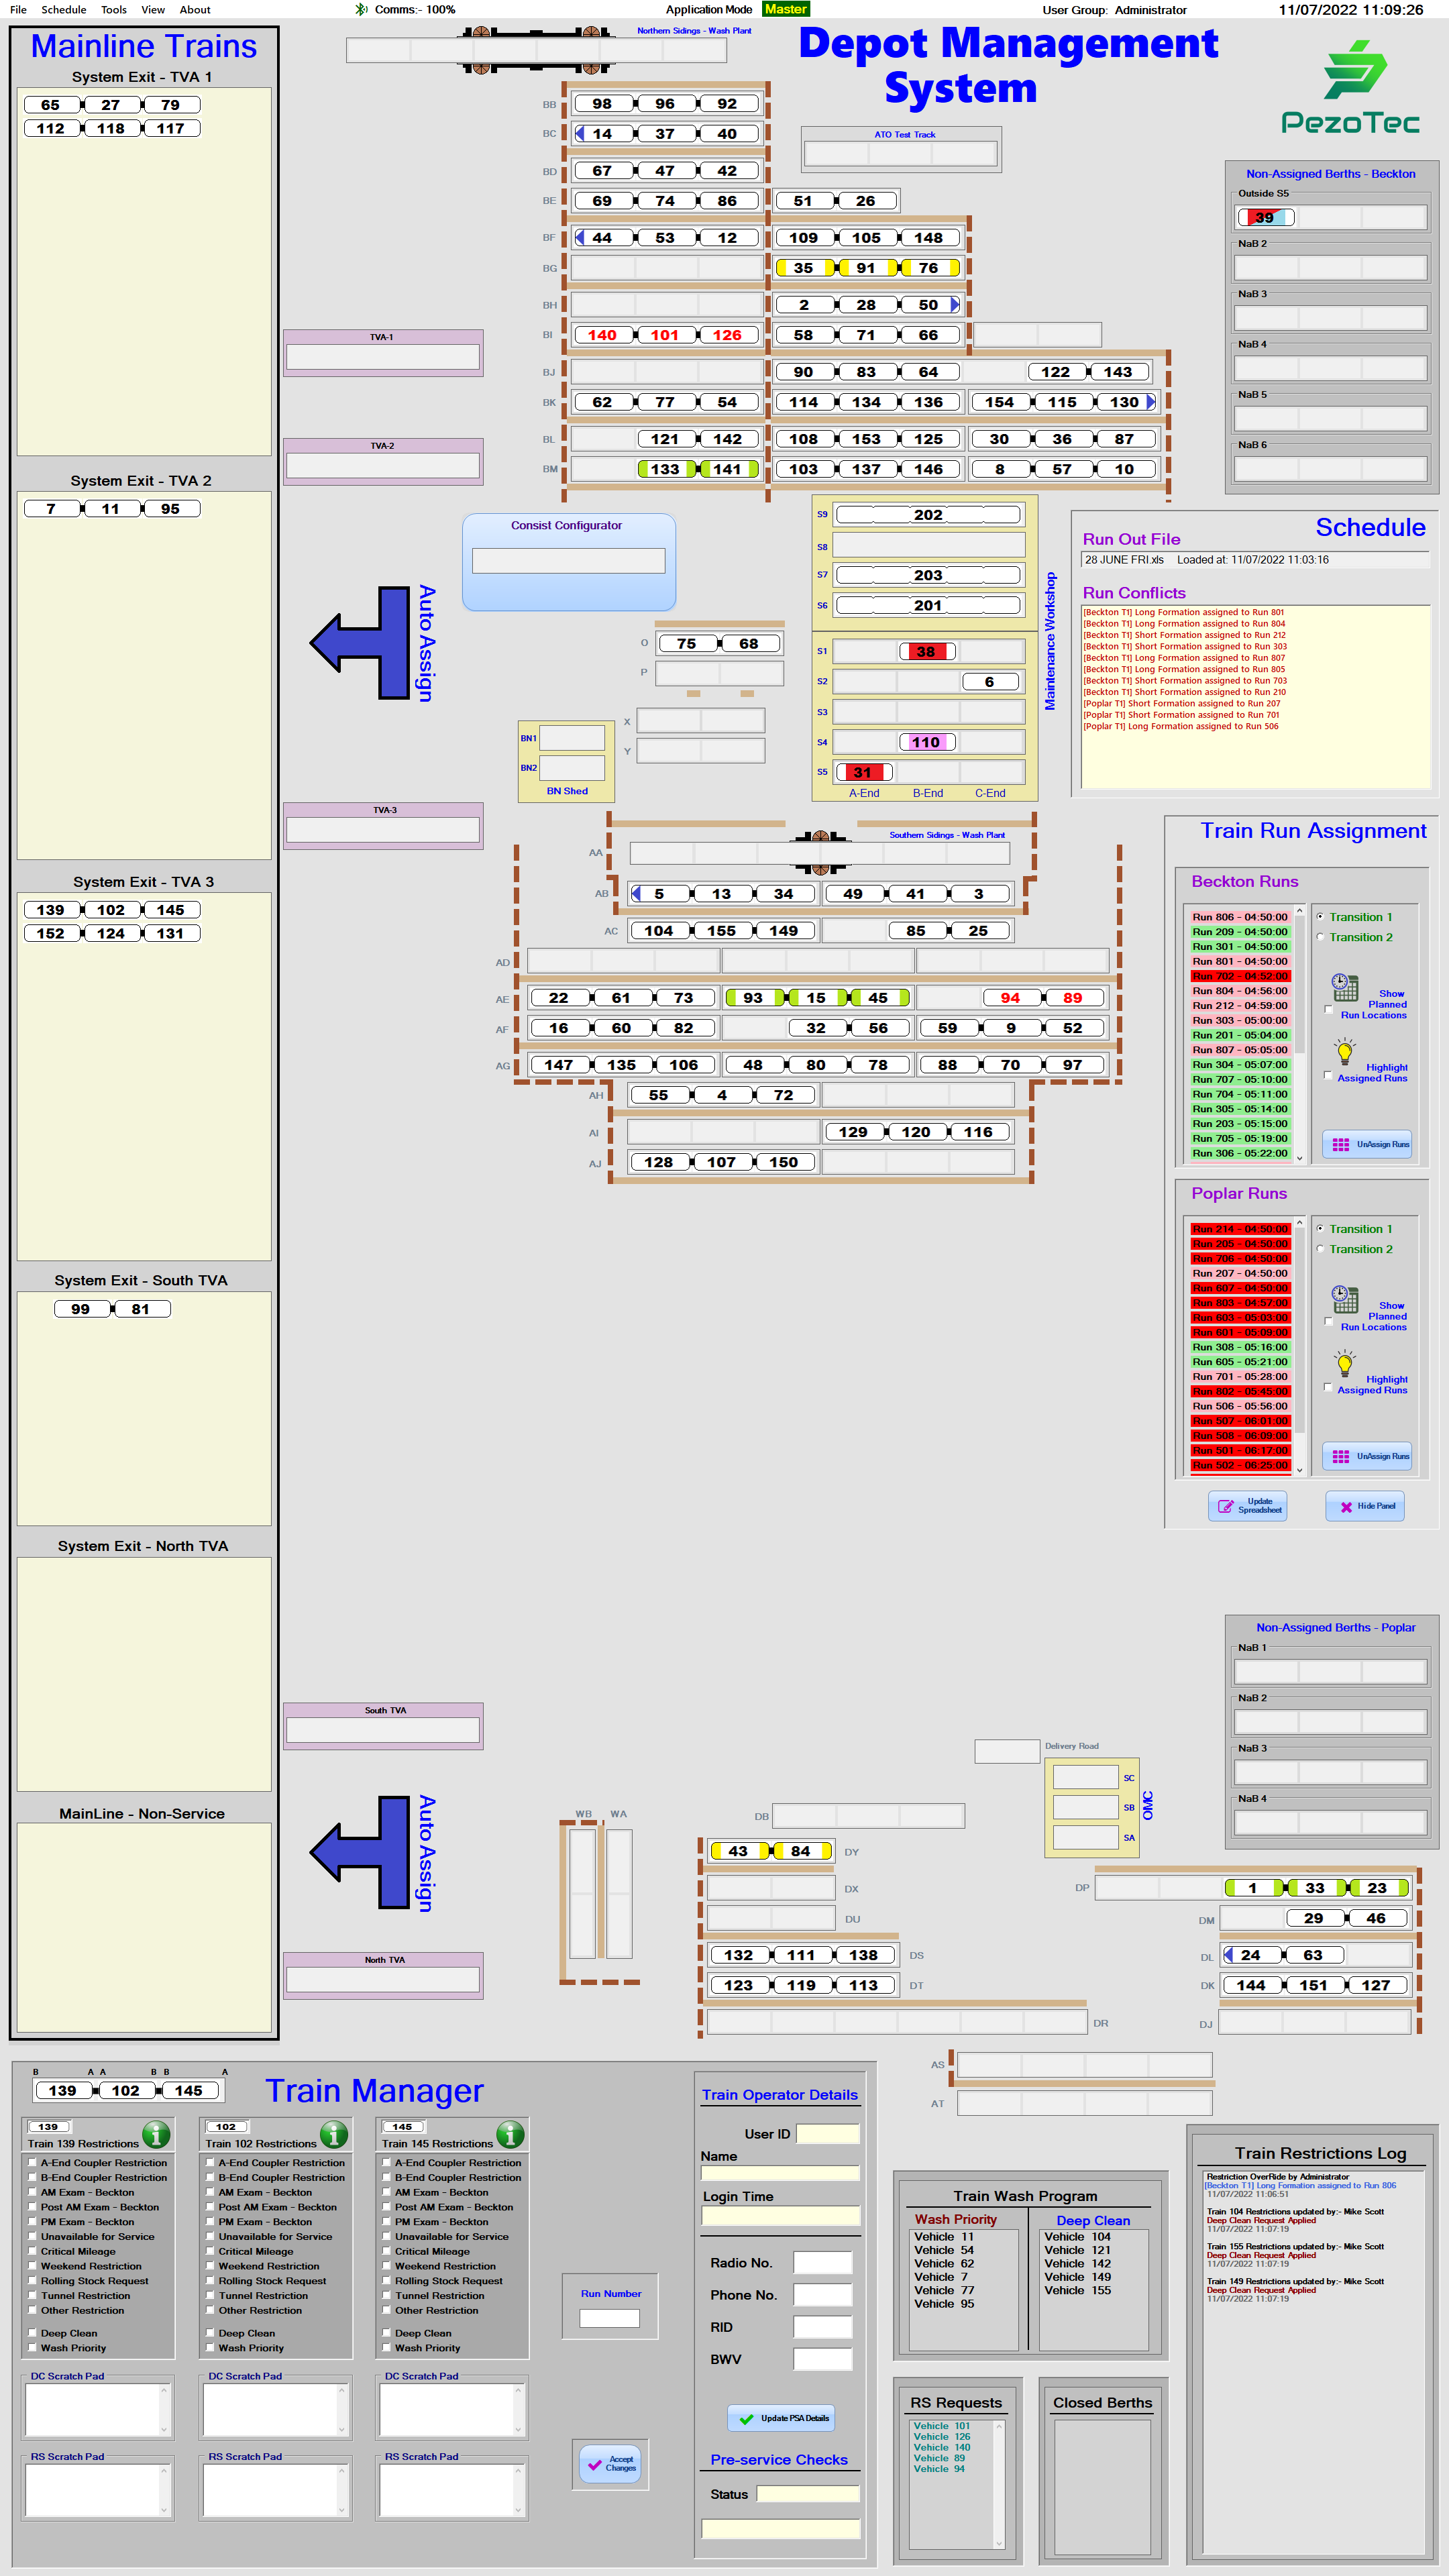 Screenshot of DMS user interface. We see a plan of railway lines within a depot with berths for trains to be stabled. There are windows to allow the user to view and control different depot management functions. It looks very comprehensive.